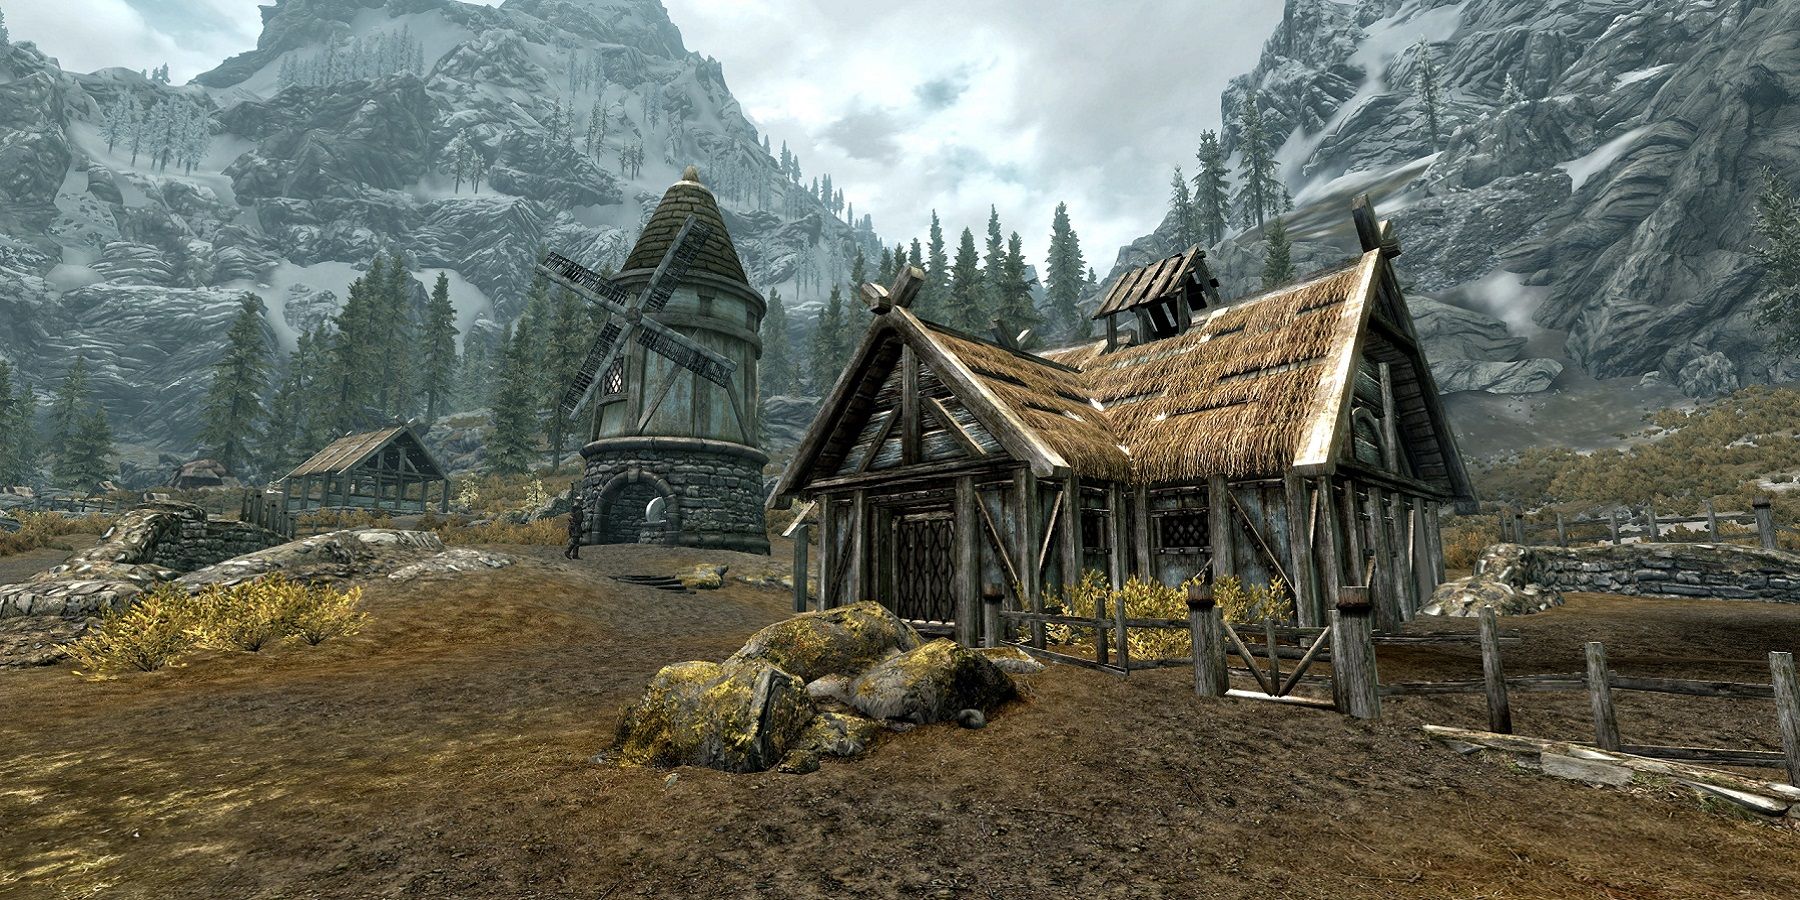 Screenshot from Skyrim showing Pelagia Farm with the snow-covered mountains in the background.